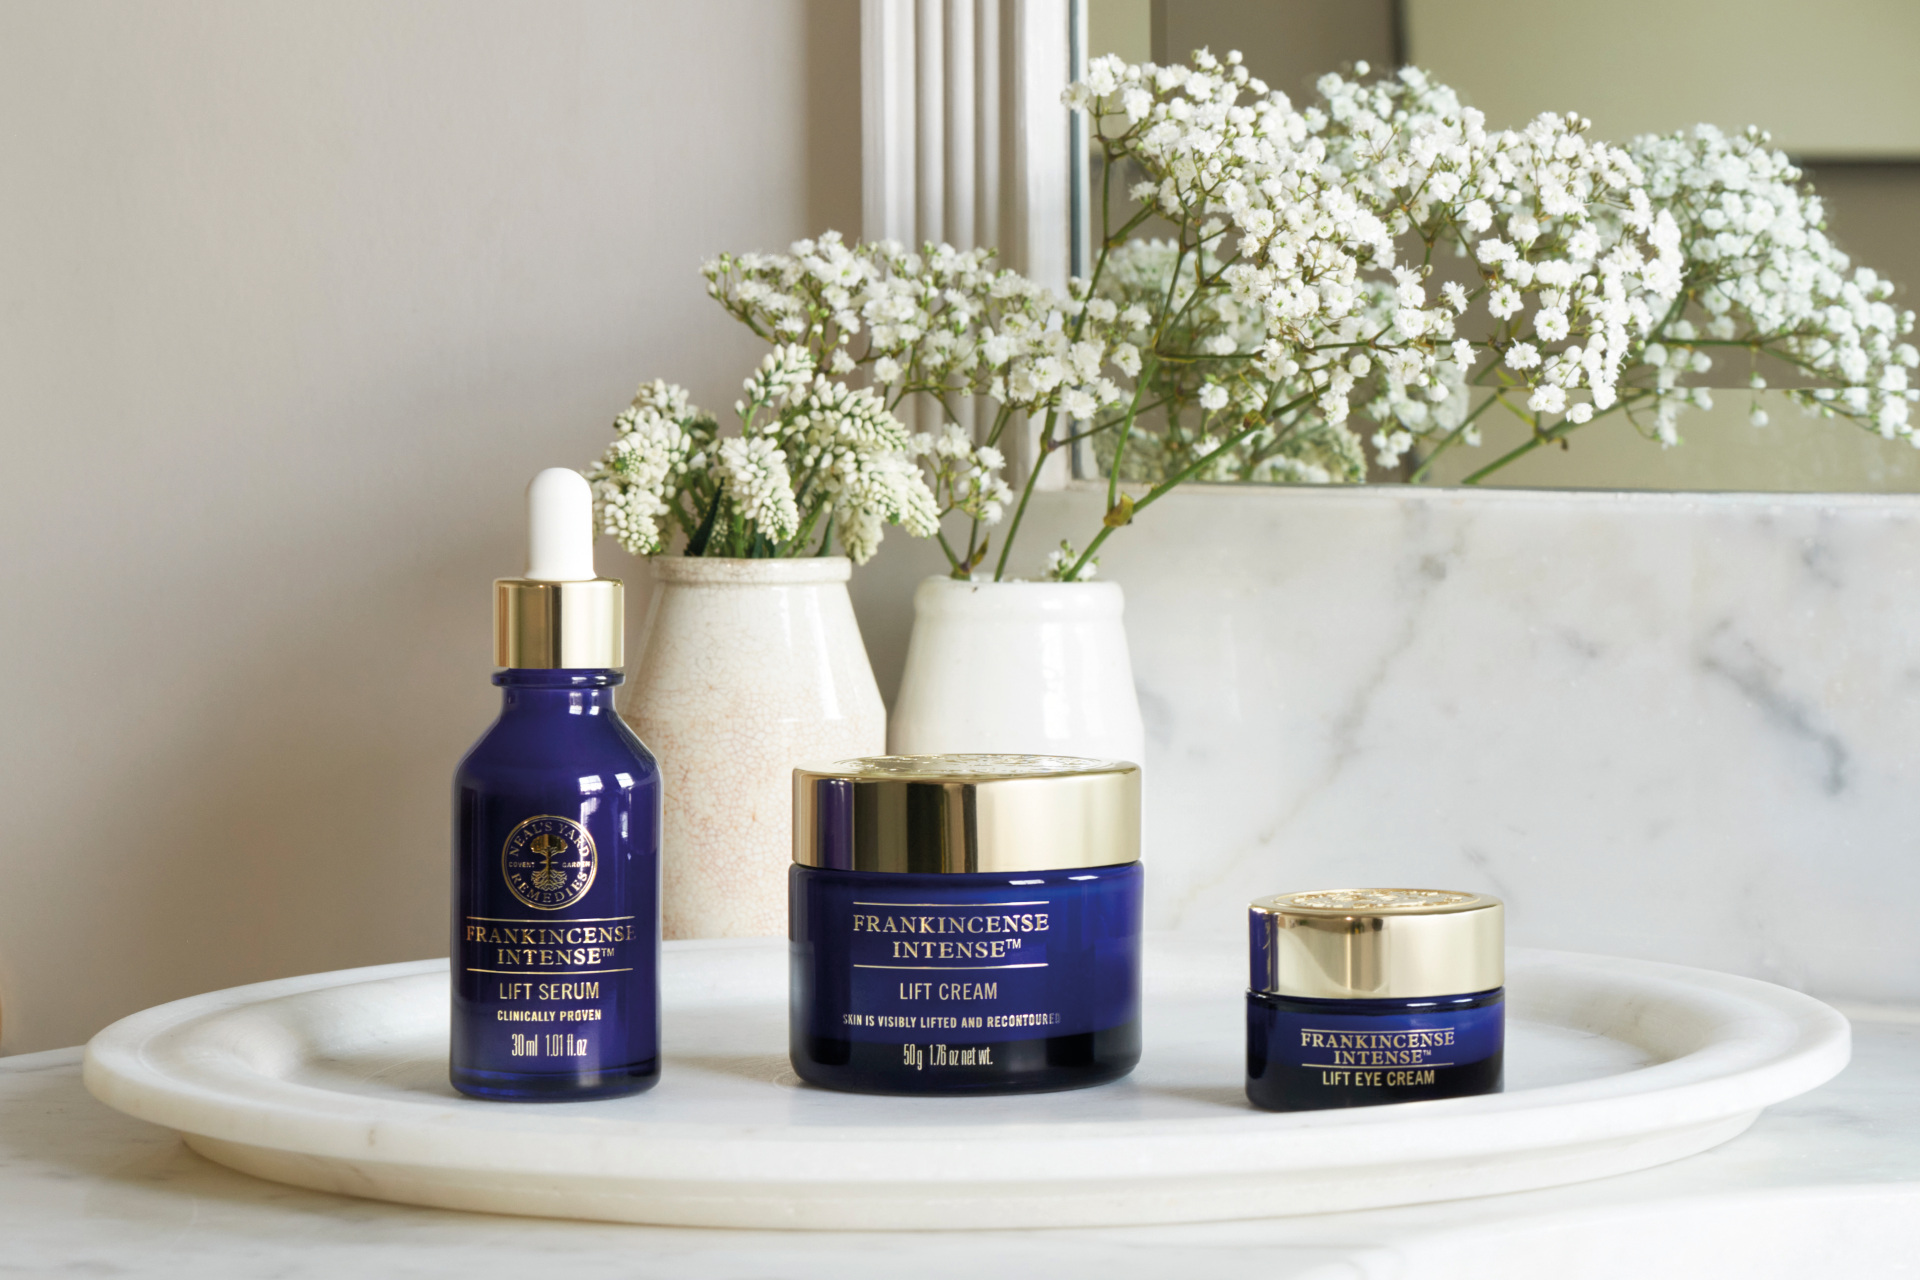 Neal's Yard Remedies Has Luxurious, Organic Skincare That Doesn’t Cost The Earth